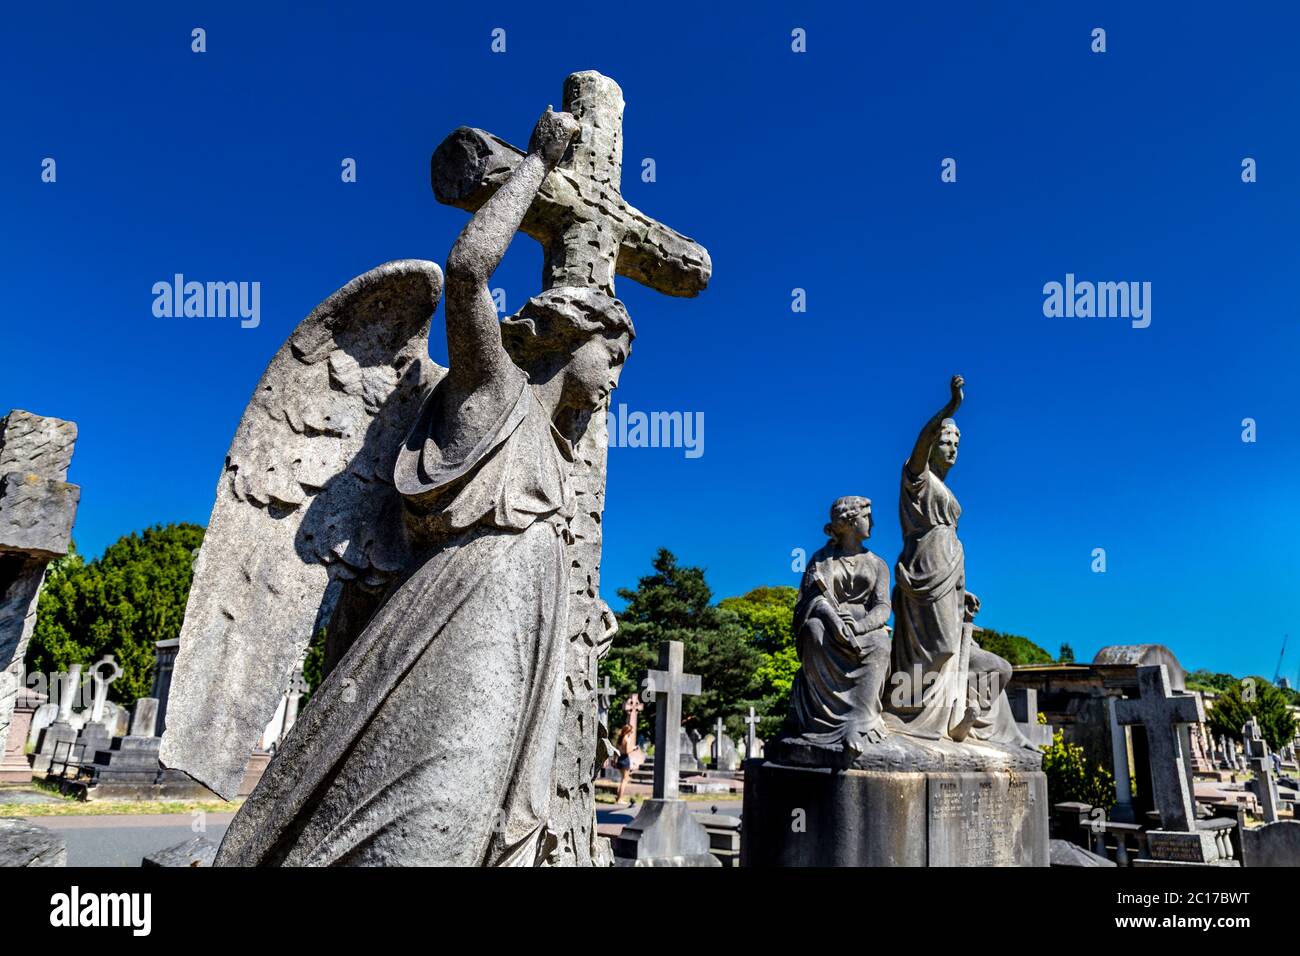 Angel with cross, funerary monuments at Brompton Cemetery, London, UK Stock Photo